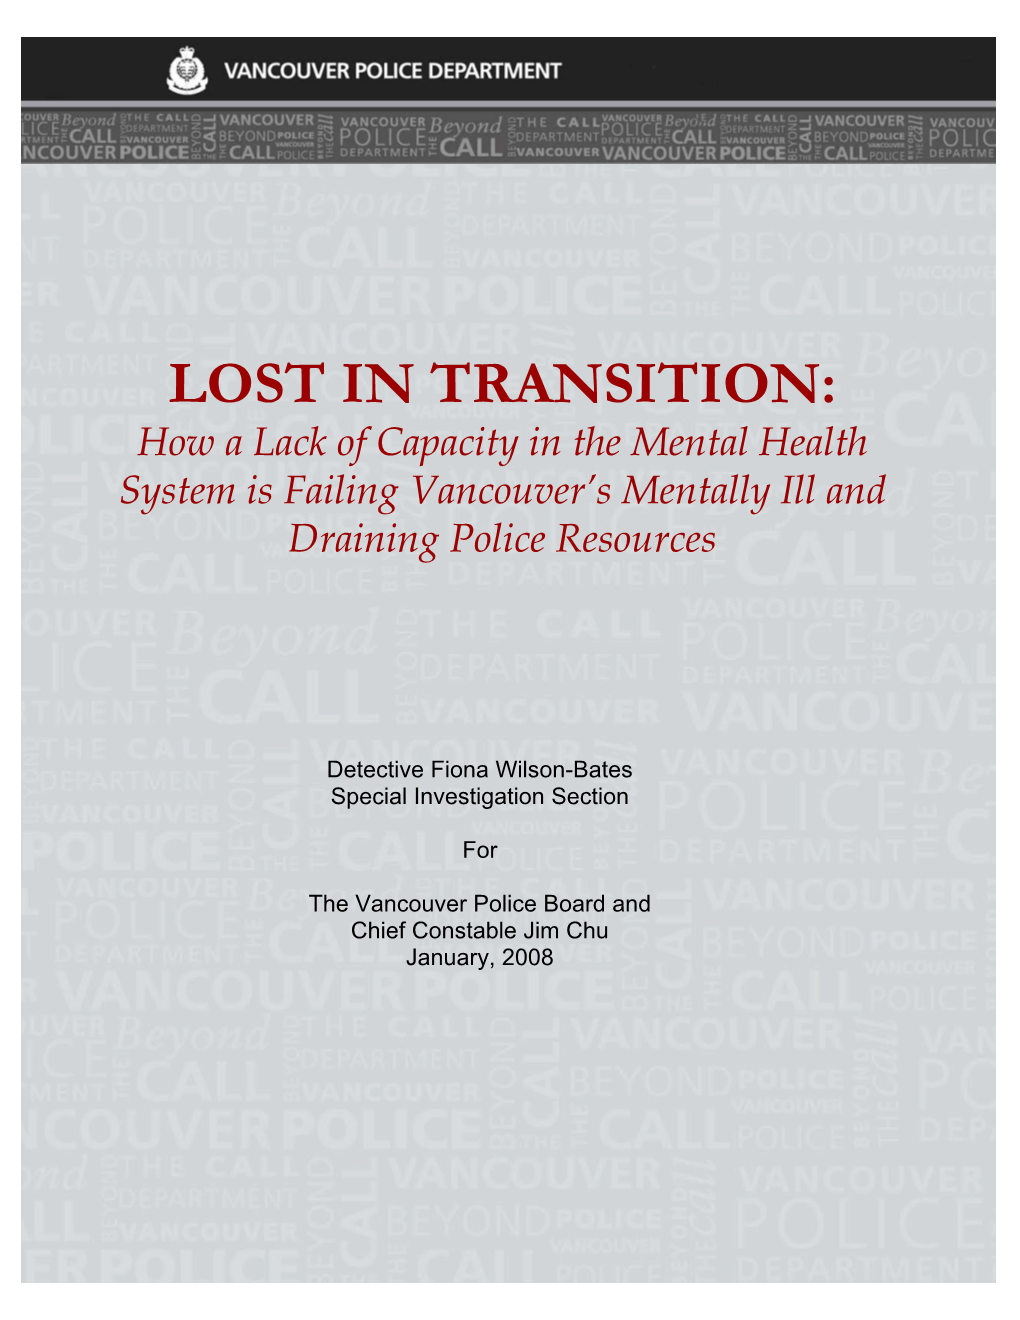 LOST in TRANSITION: How a Lack of Capacity in the Mental Health System Is Failing Vancouver’S Mentally Ill and Draining Police Resources